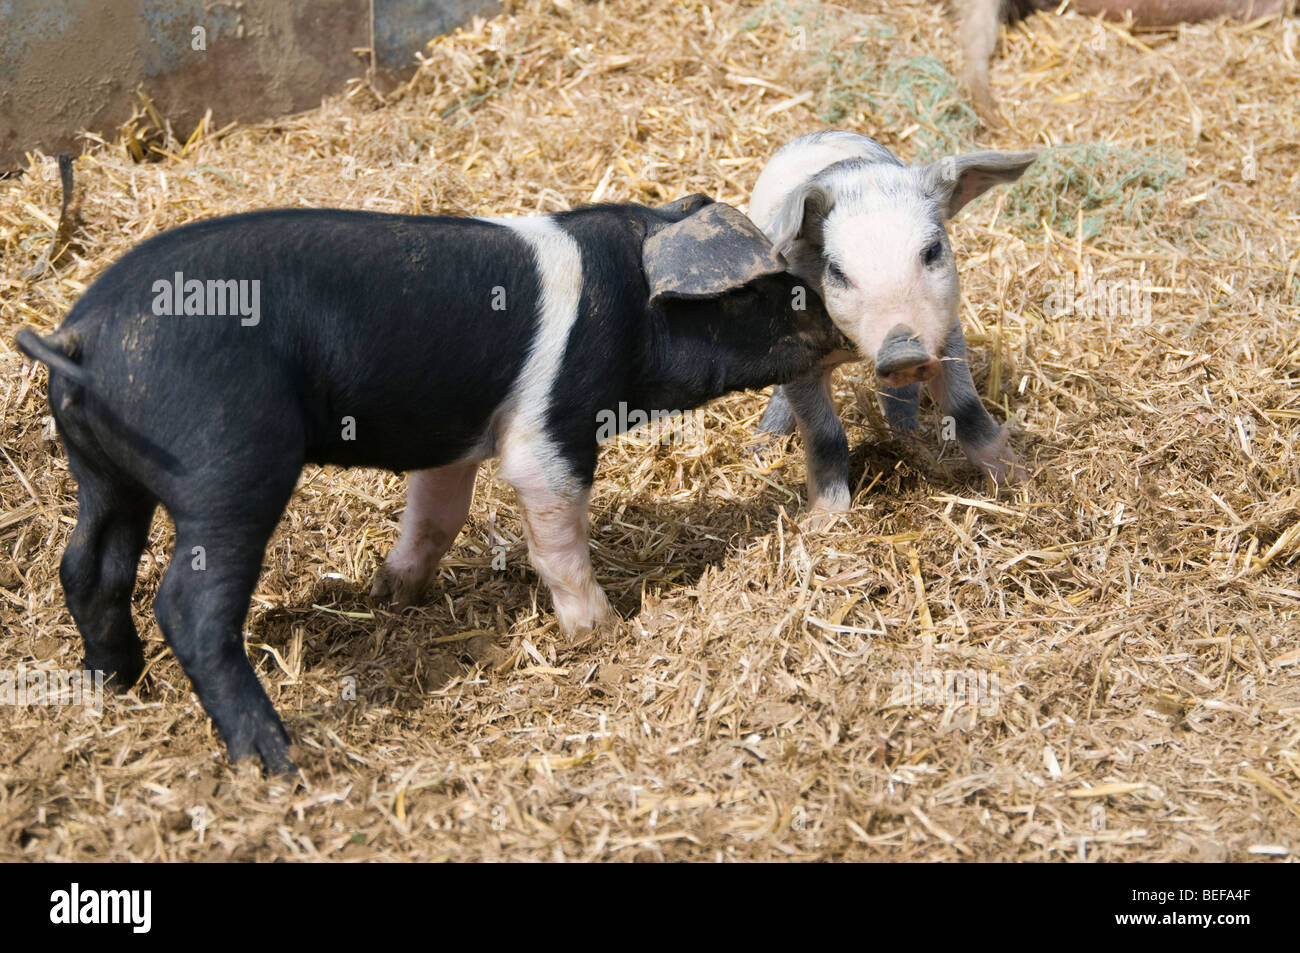 Two piglets chasing each other Stock Photo